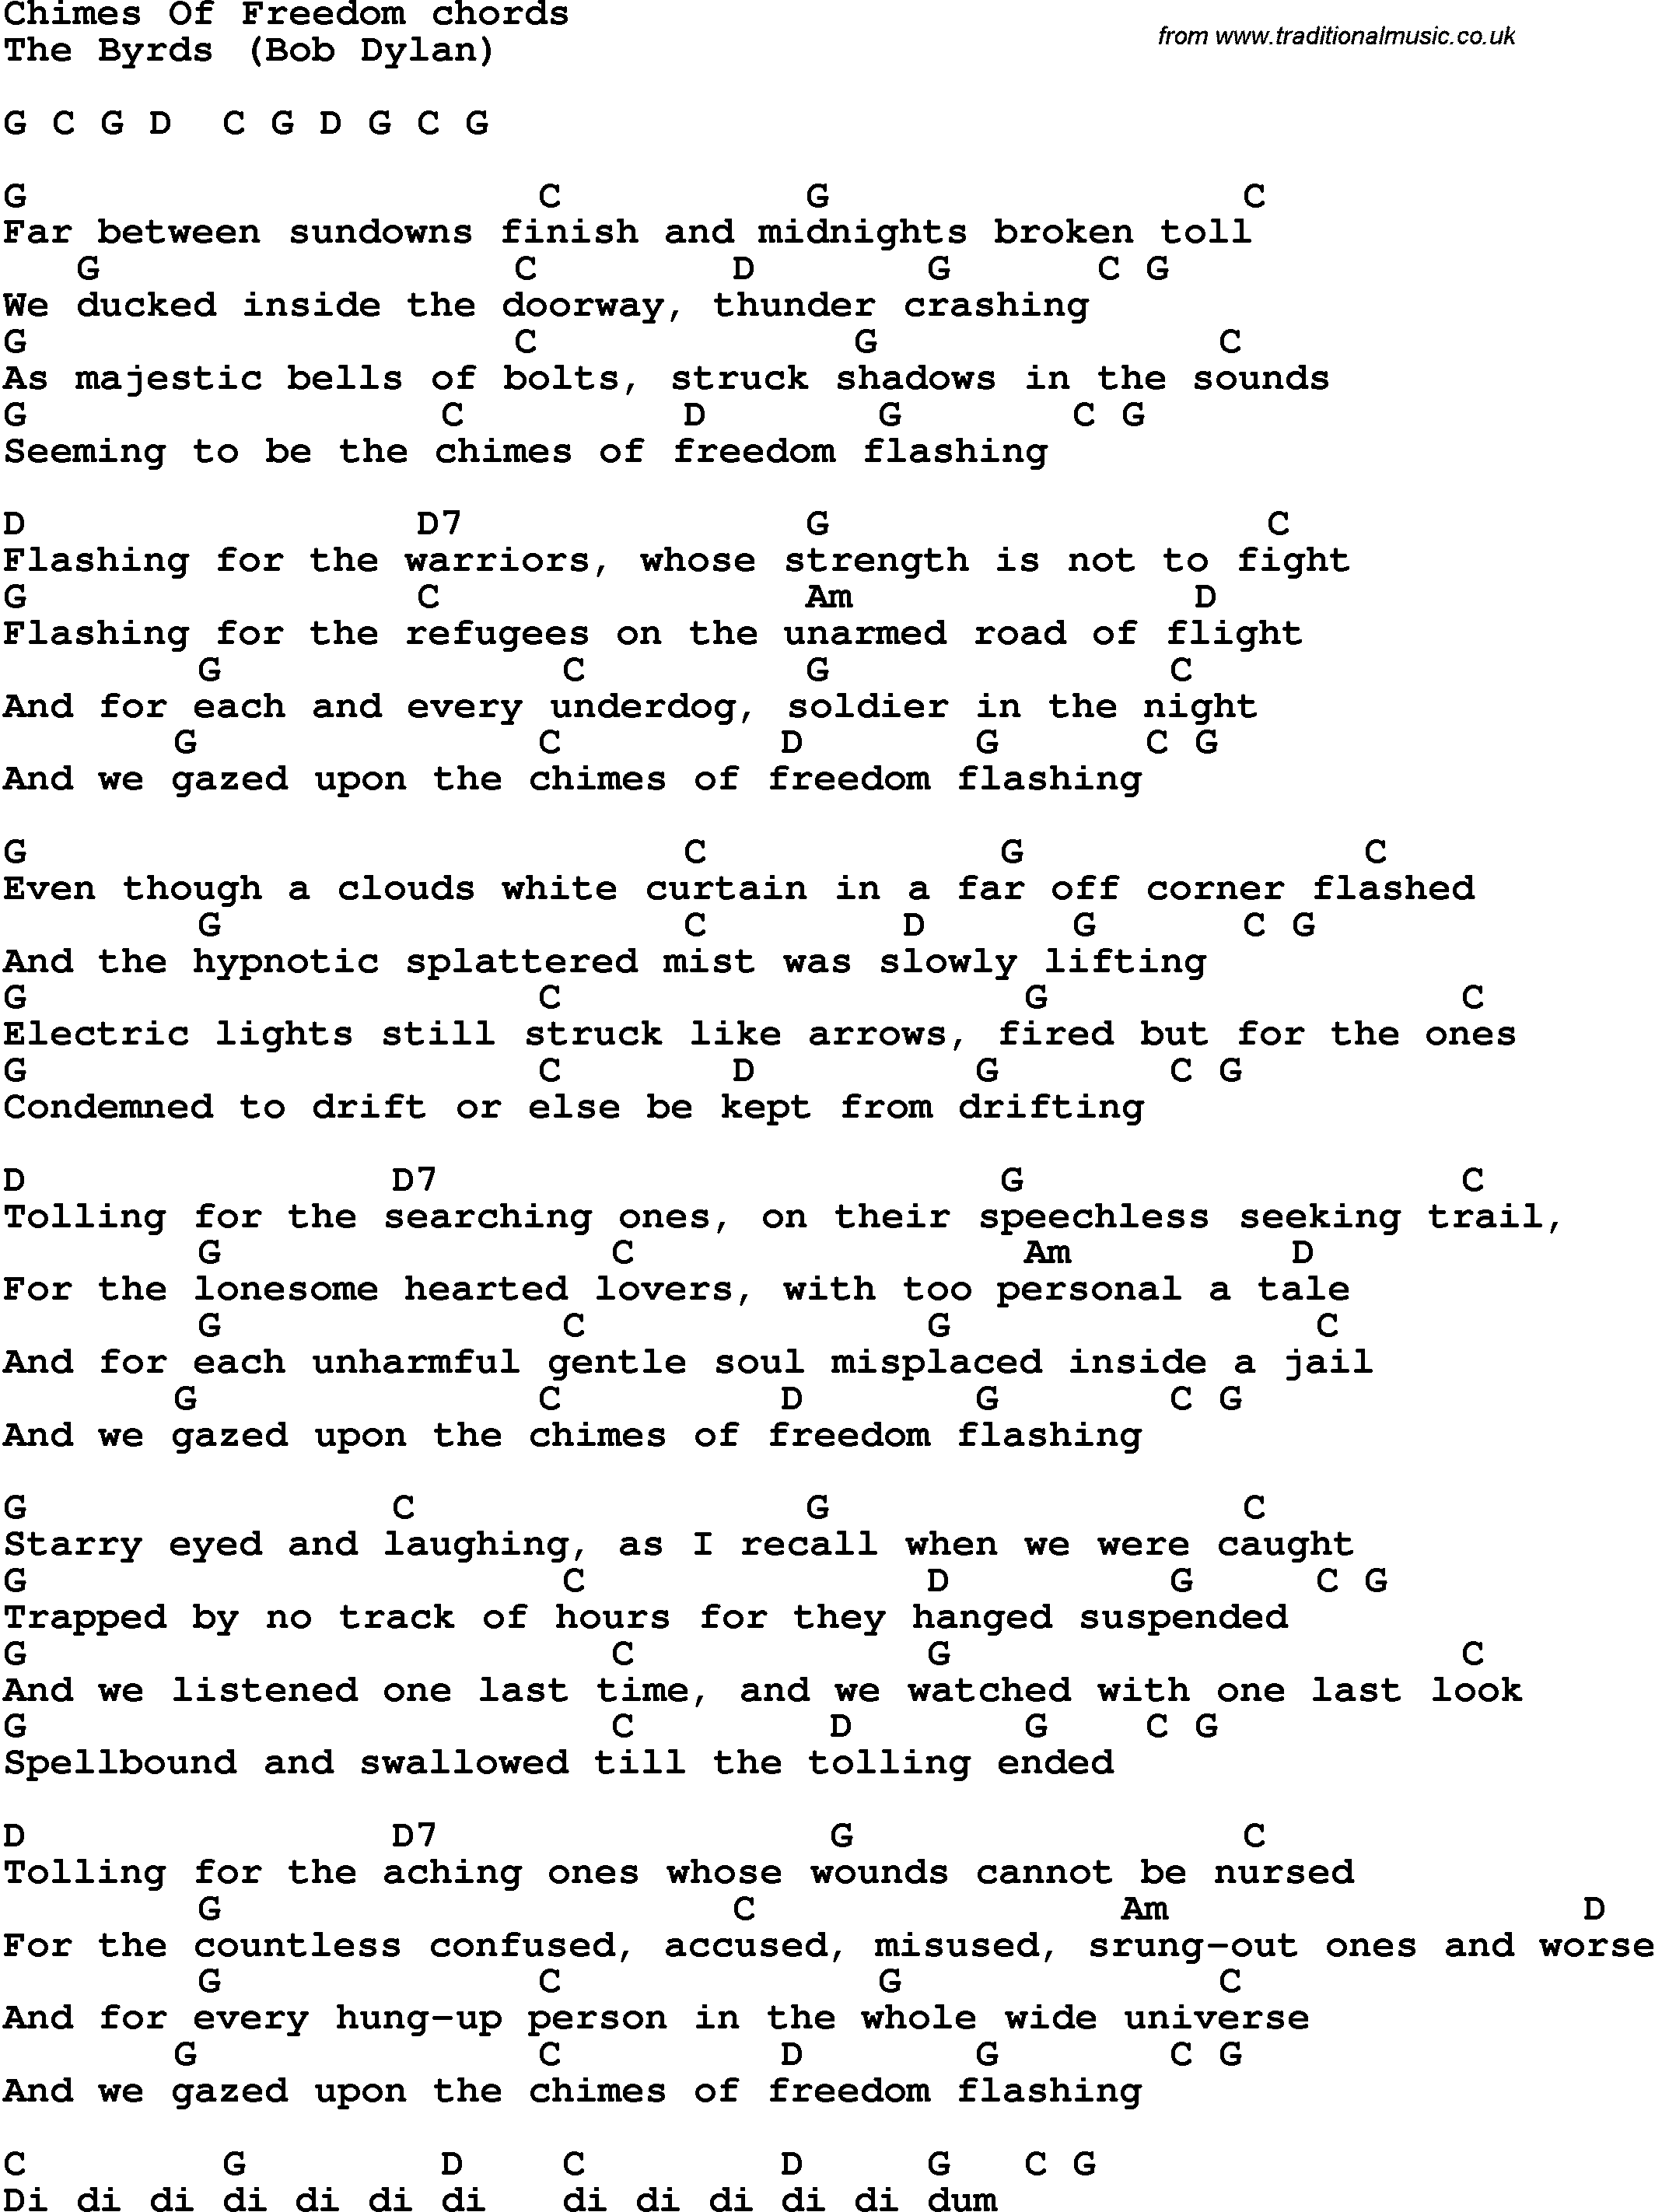 Song Lyrics with guitar chords for Chimes Of Freedom